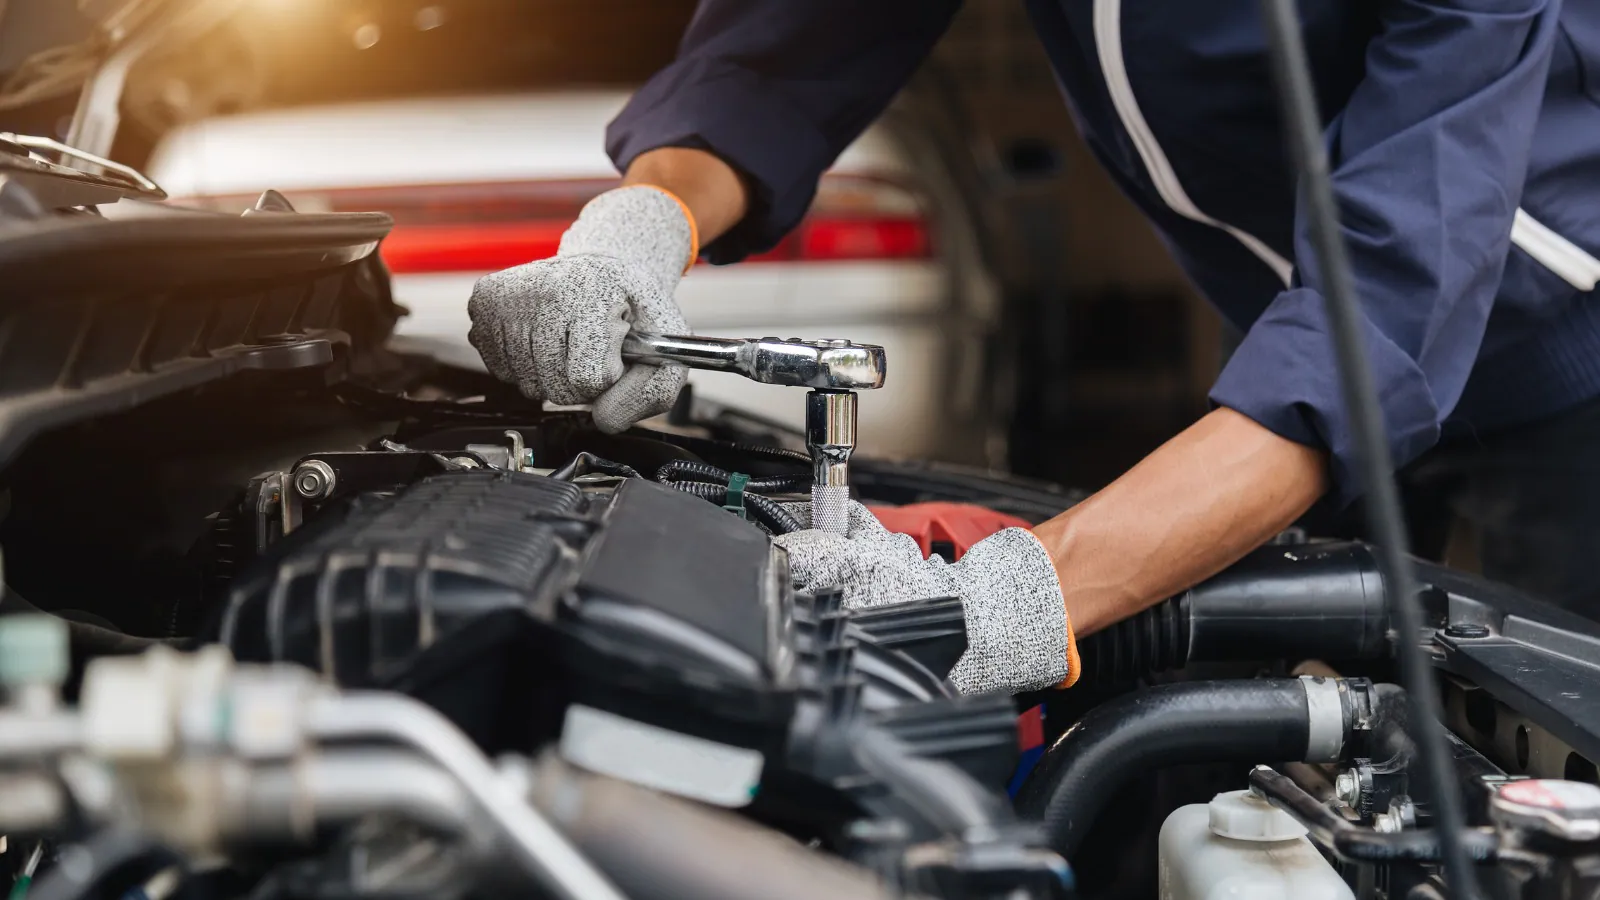 Expert Advice on Car Services: What You Need to Know to Keep Your Vehicle in Top Condition